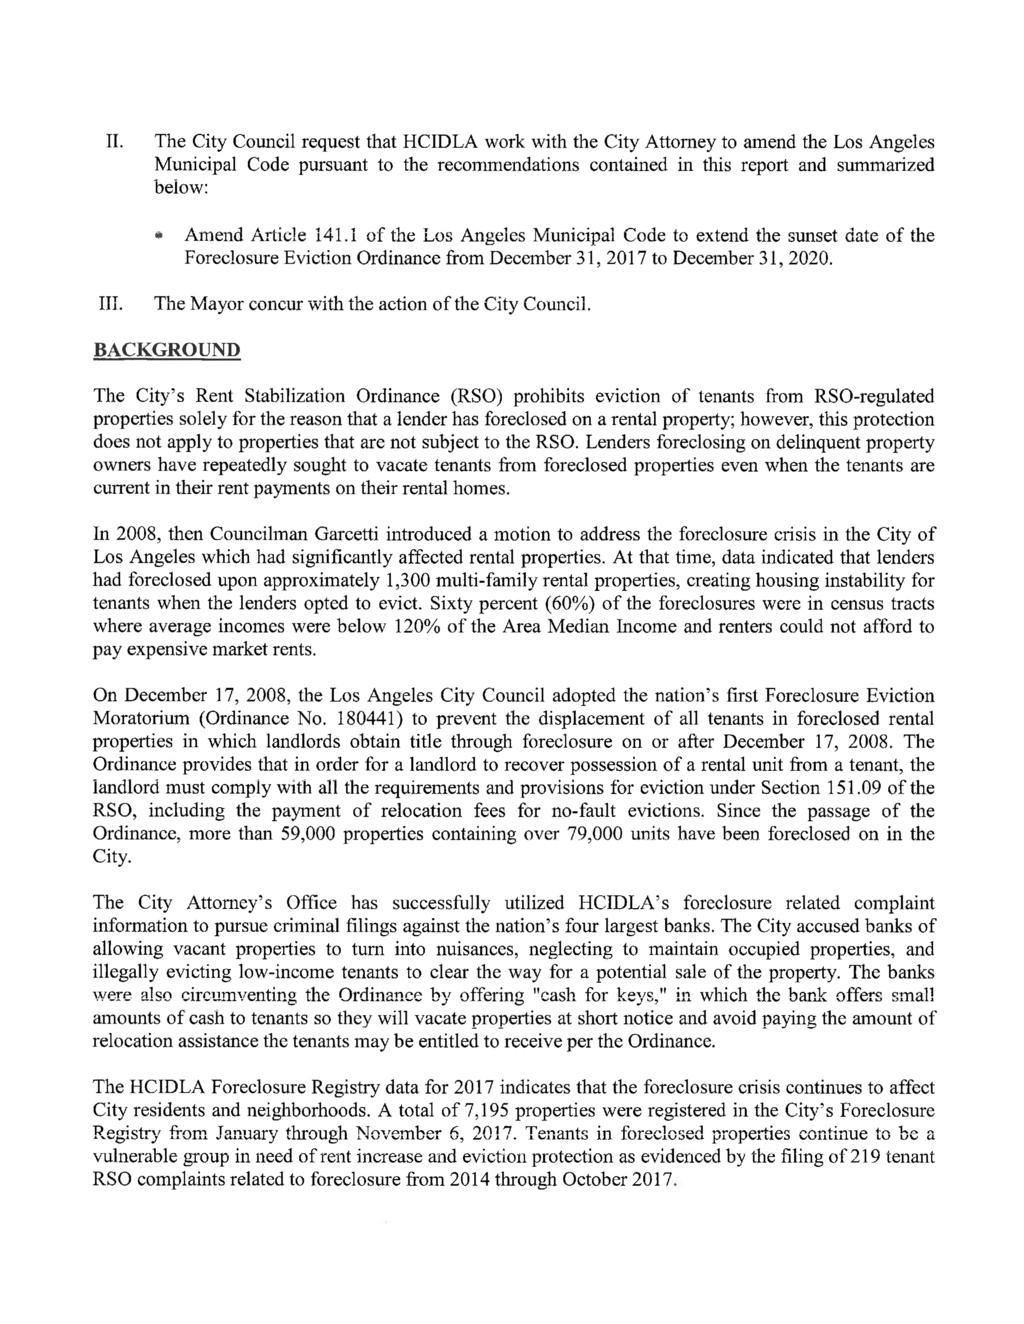 II. The City Council request that HCIDLA work with the City Attorney to amend the Los Angeles Municipal Code pursuant to the recommendations contained in this report and summarized below: III.